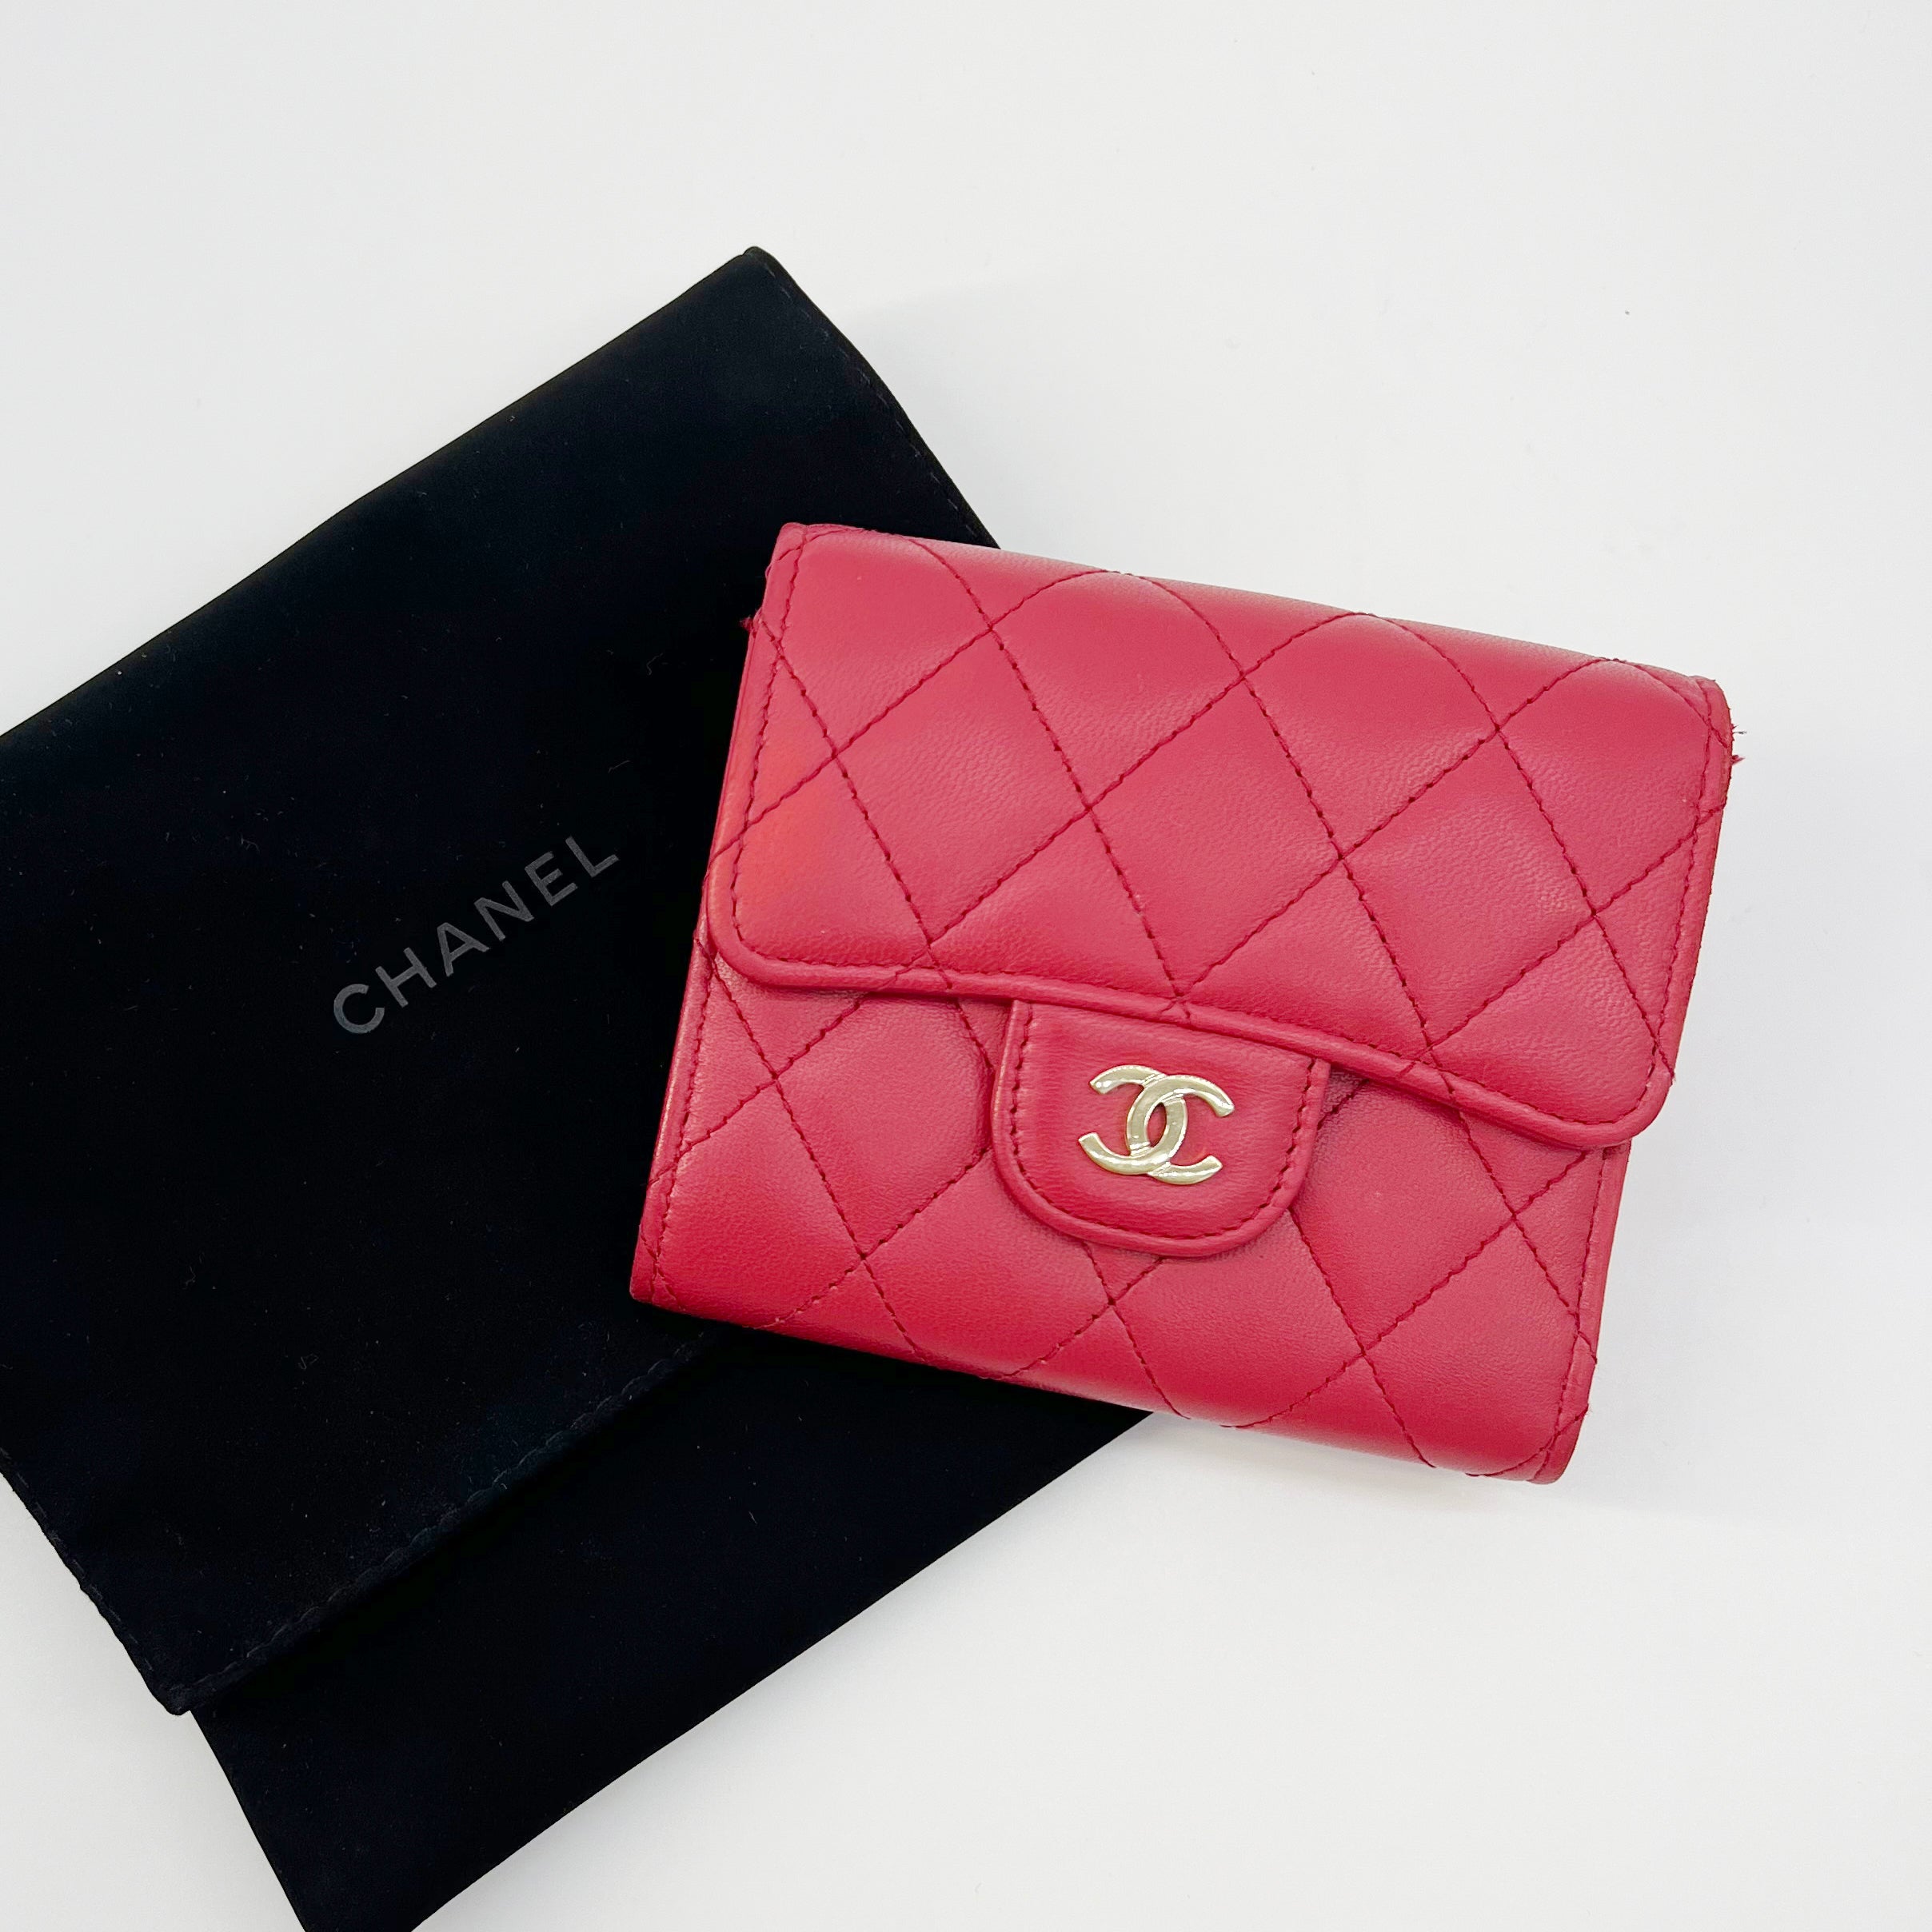 Guaranteed Authentic Chanel CC Quilted Compact Flap Trifold Wallet